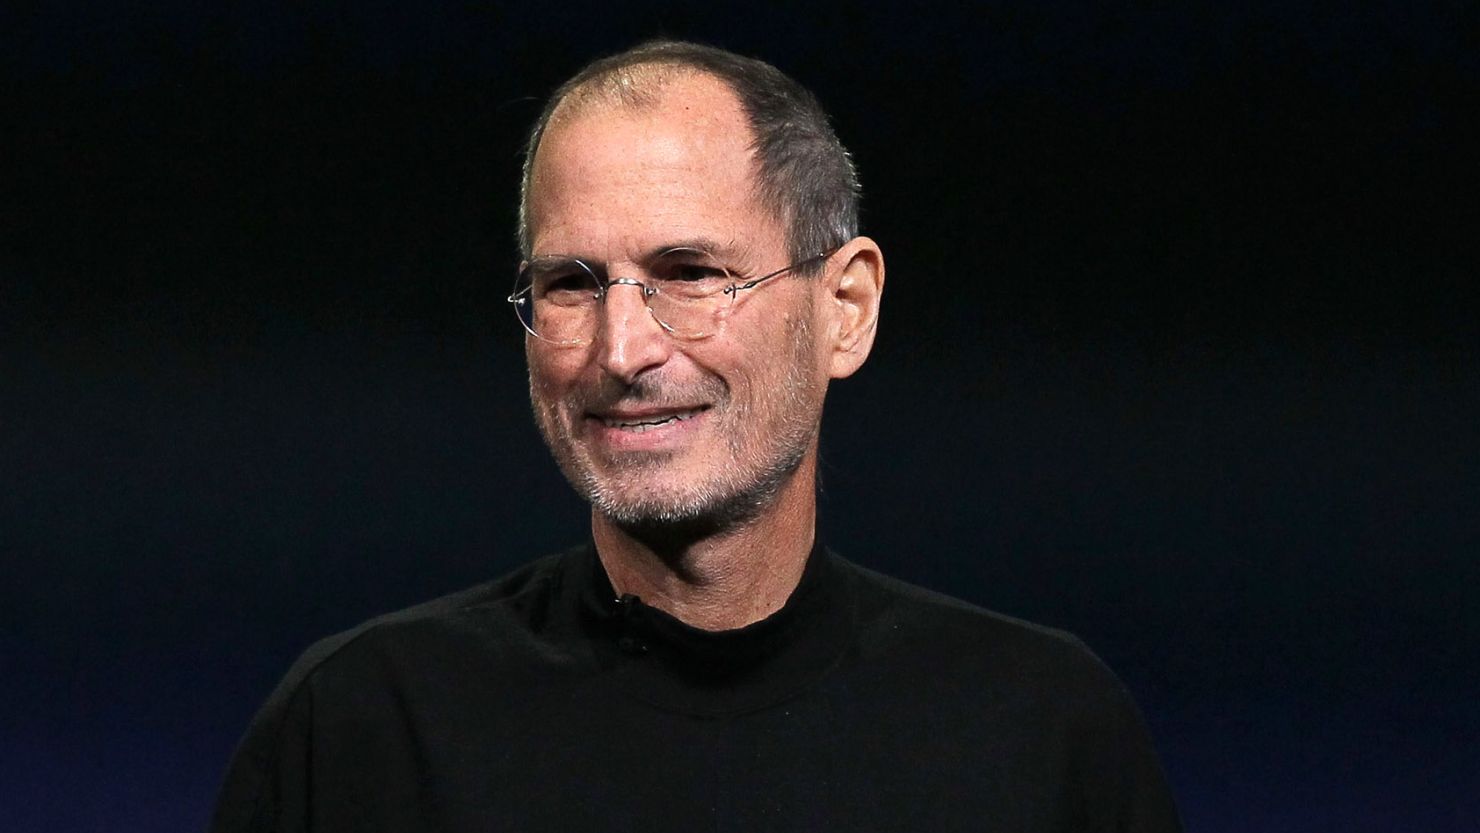 Tech visionary and Apple co-founder Steve Jobs may appear on a U.S. postage stamp in 2015, according to a leaked document.